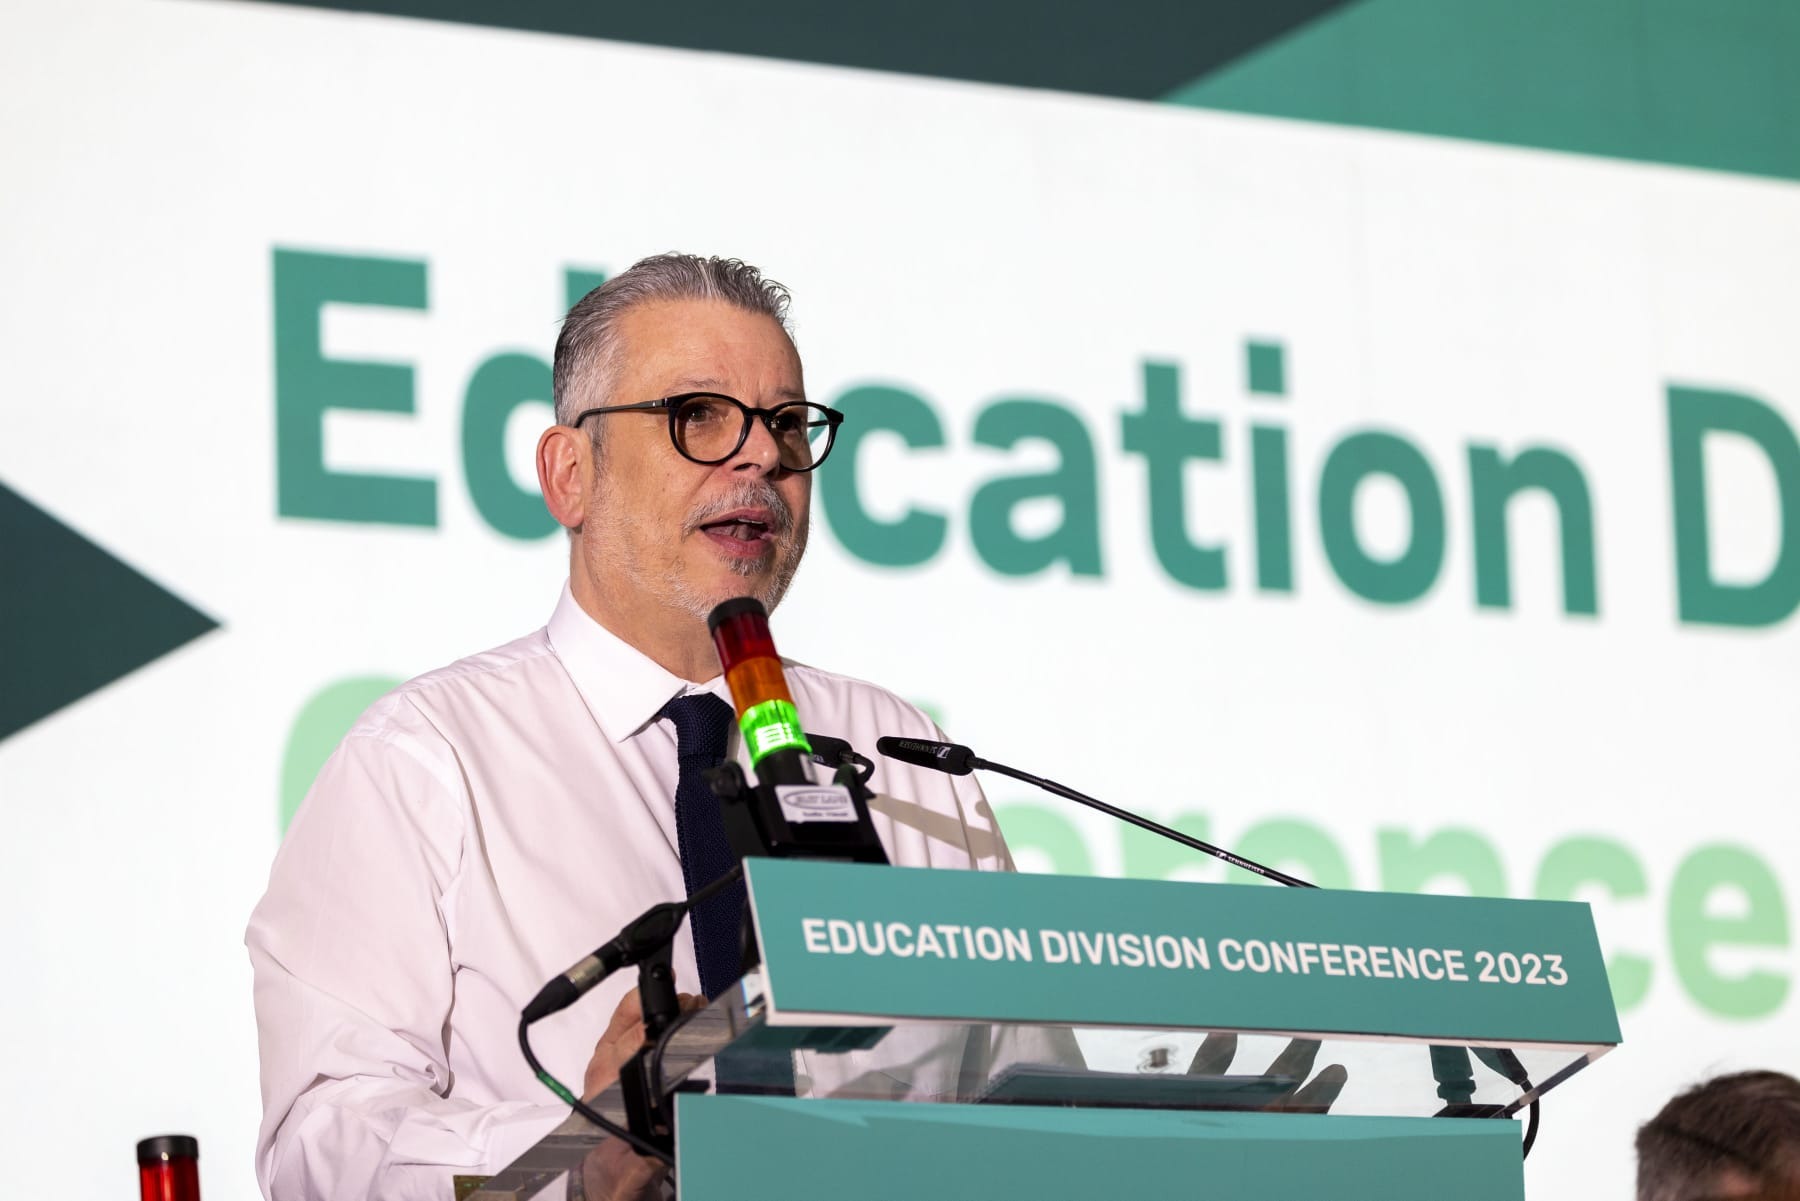 Andy called on the minister to continue her work with the Department of Education and the National Council for Special Education (NCSE) to bring clarity on the direction of the special education sector.